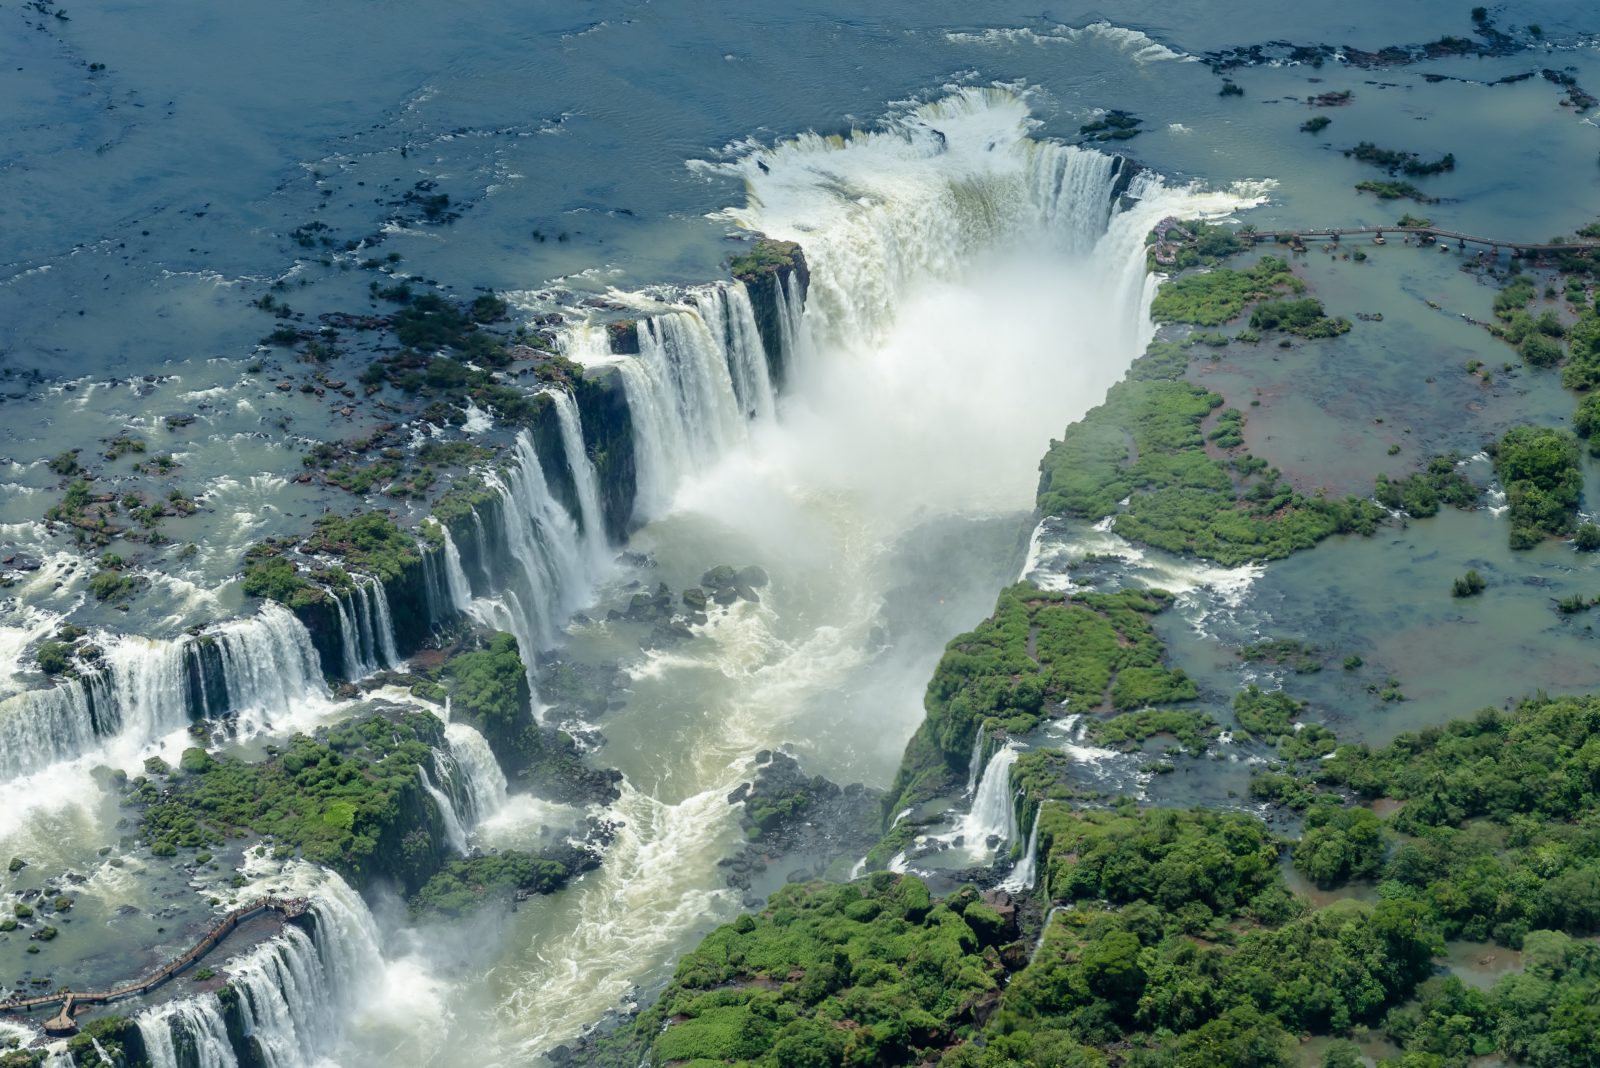 Can You Match These Natural Wonders to Their Locations? Iguazu Falls